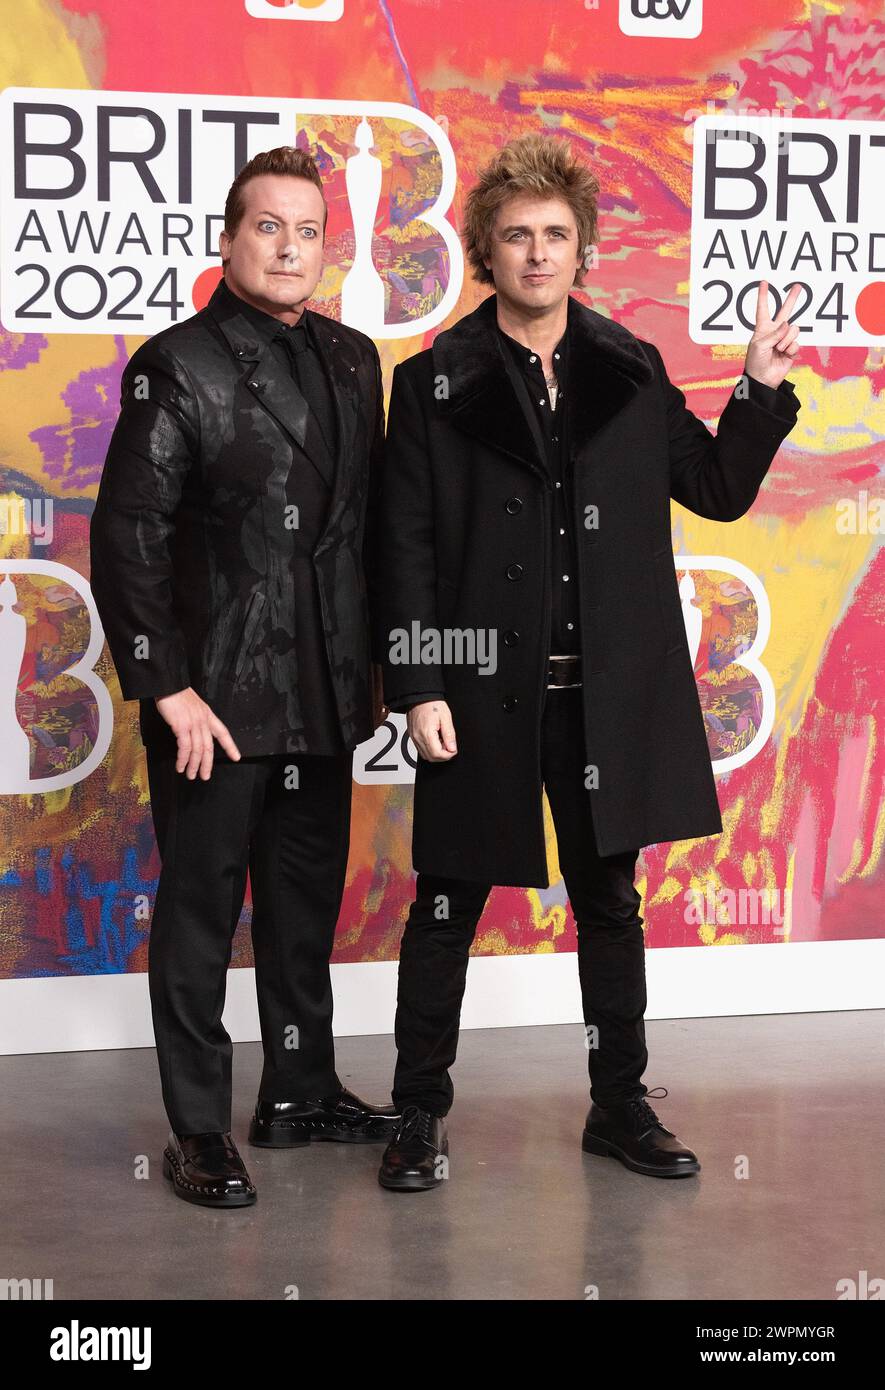 London, UK. March 2nd, 2024.   (EDITORIAL USE ONLY. NO PUBLICATIONS DEVOTED EXCLUSIVELY TO THE ARTIST) Tré Cool and Billie Joe Armstrong of Green Day attends the BRIT Awards 2024 at The O2 Arena on March 02, 2024 in London, England. Credit: S.A.M./Alamy Live News Stock Photo